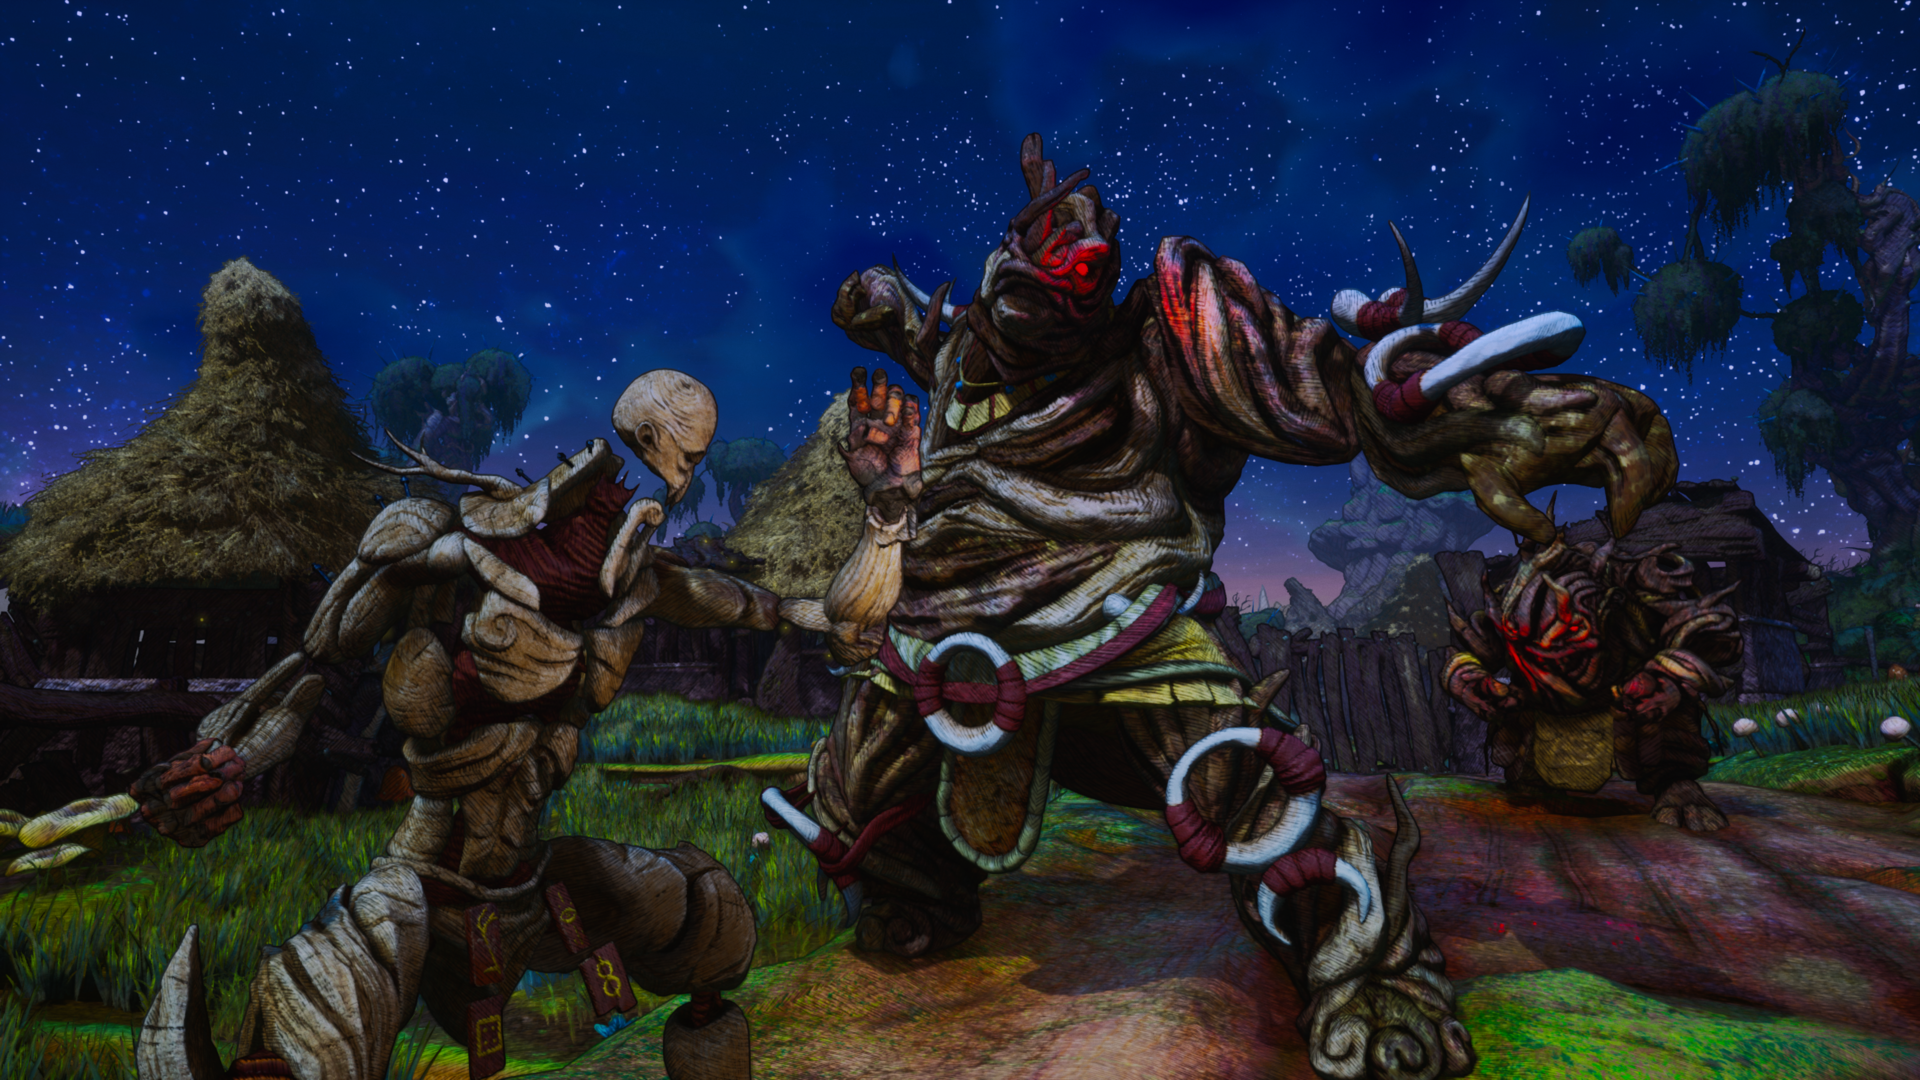 A wooden ghost fighting an enemy in Clash: Artifacts of Chaos.